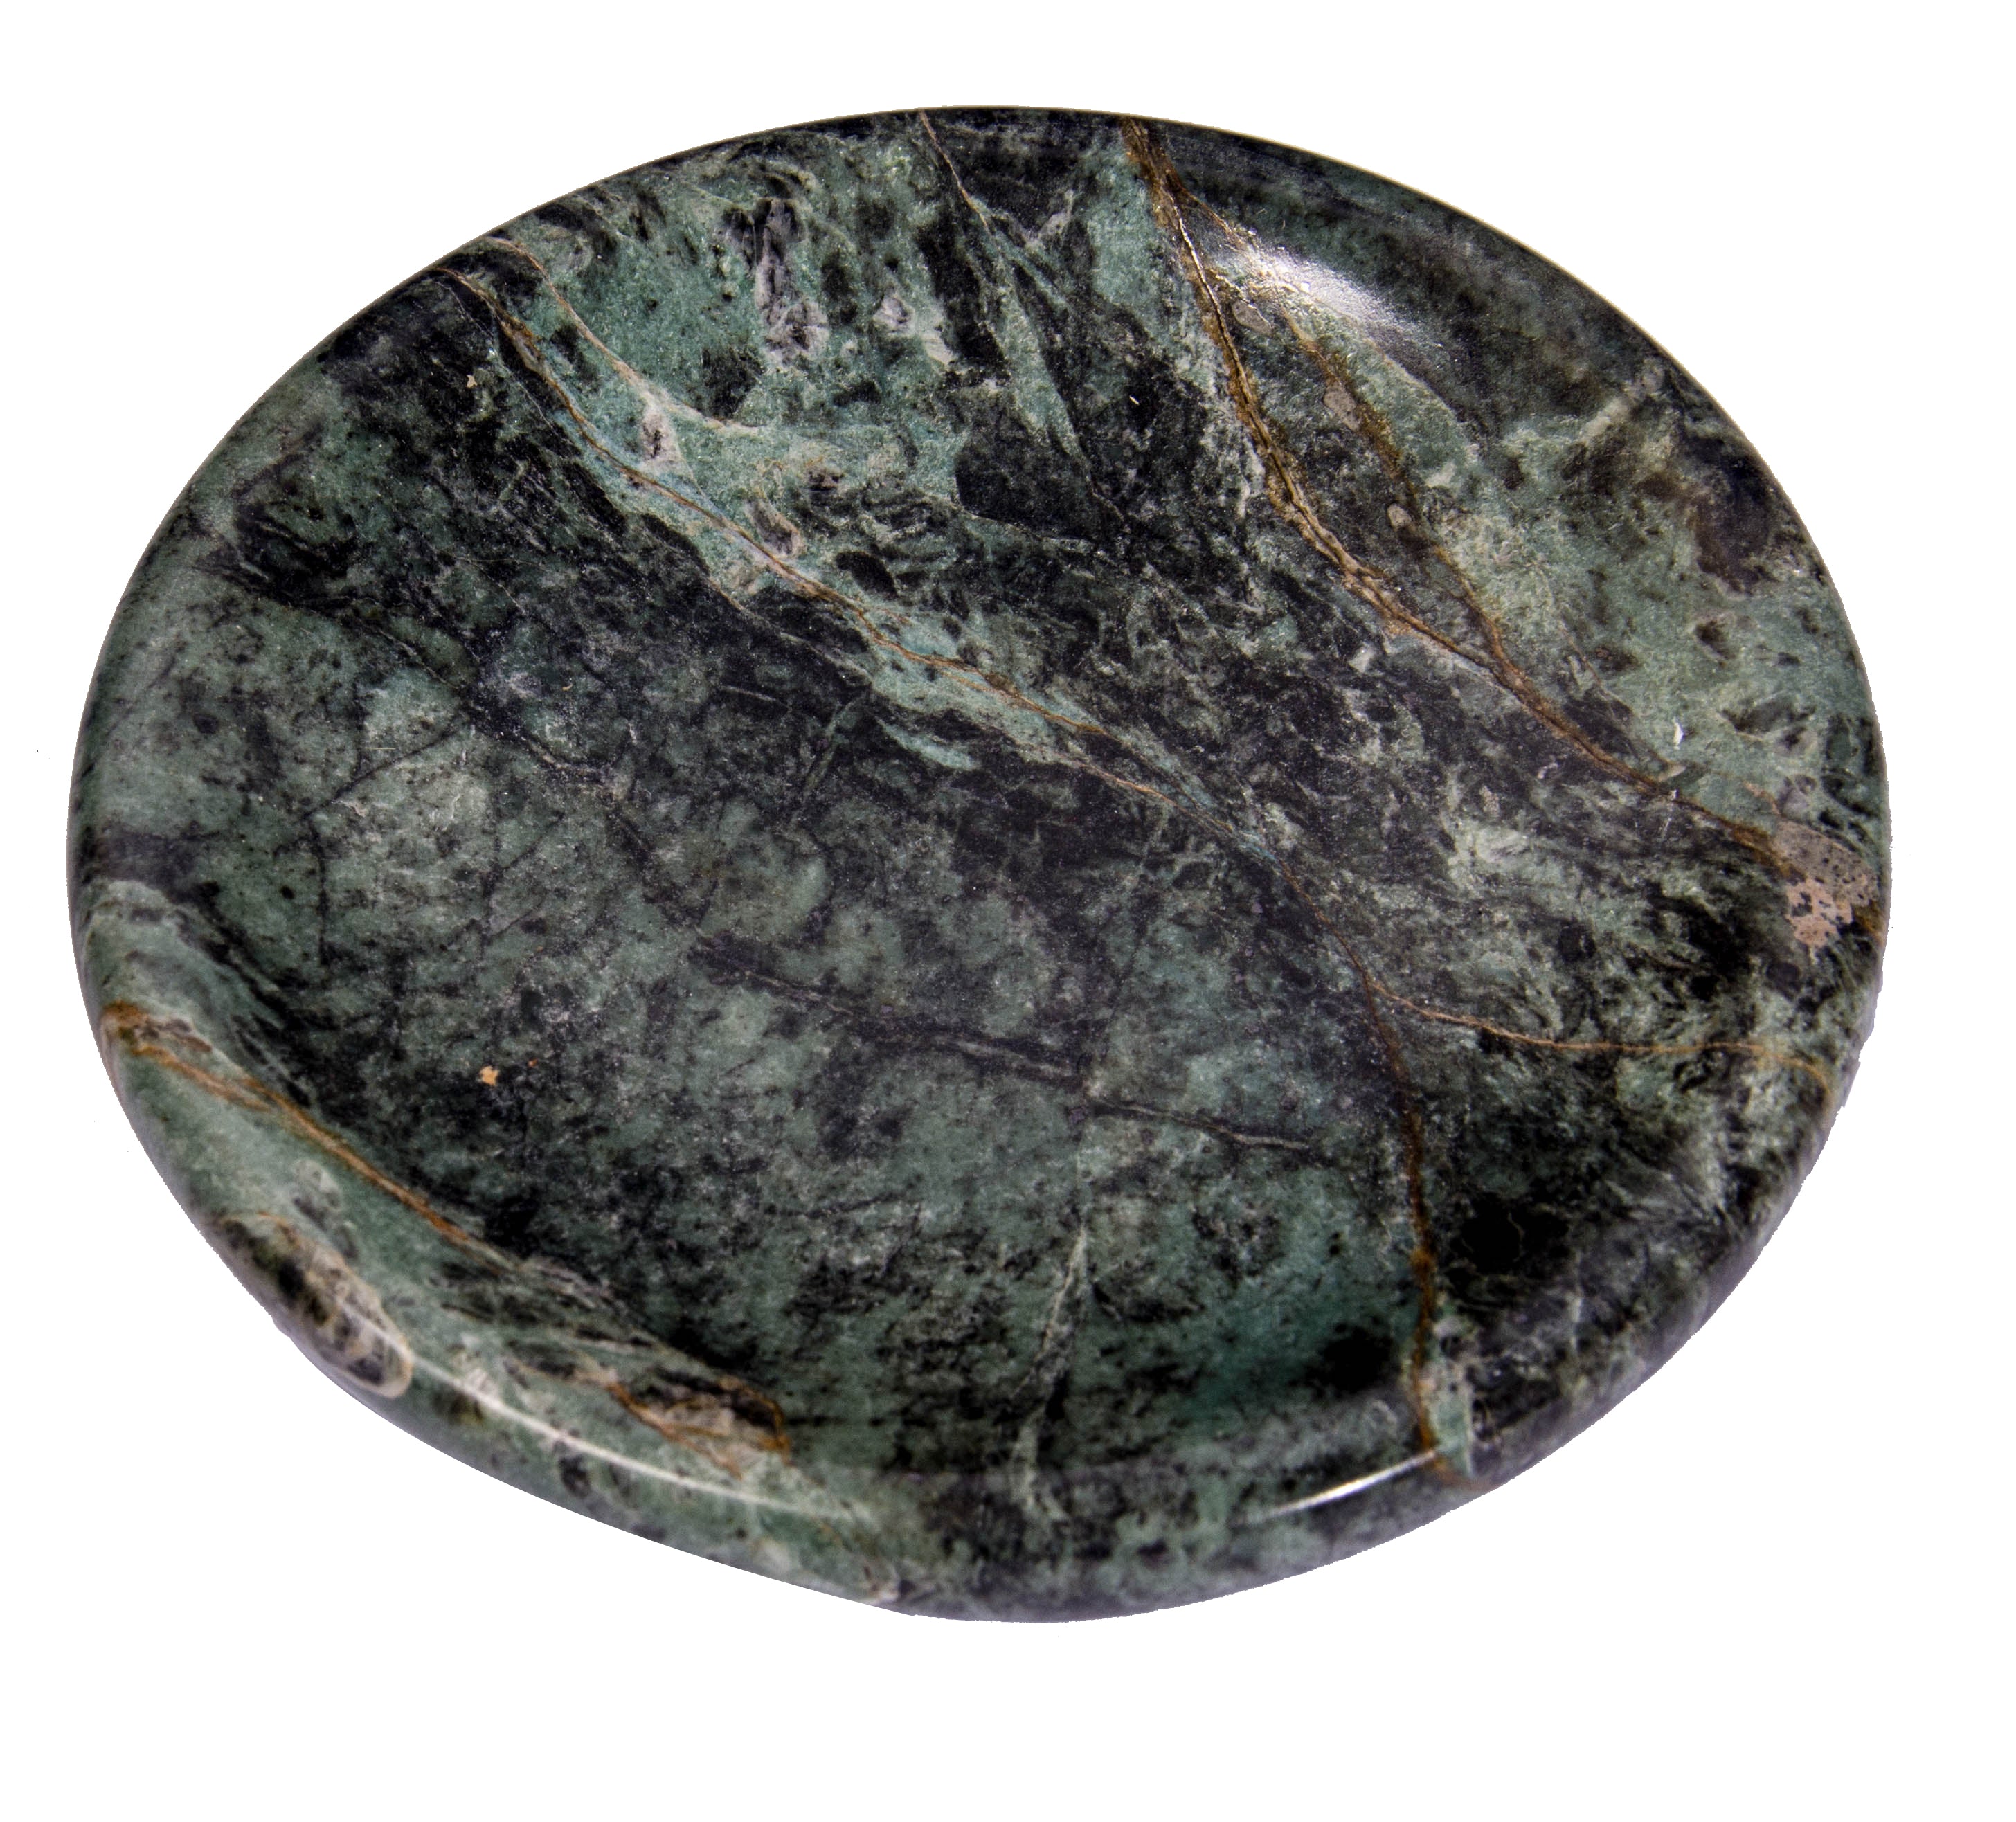 Green Marble Soap Dish - Polished and Shiny Marble Dish Holder - Beautifully Crafted Bathroom Accessory - by CraftsOfEgypt